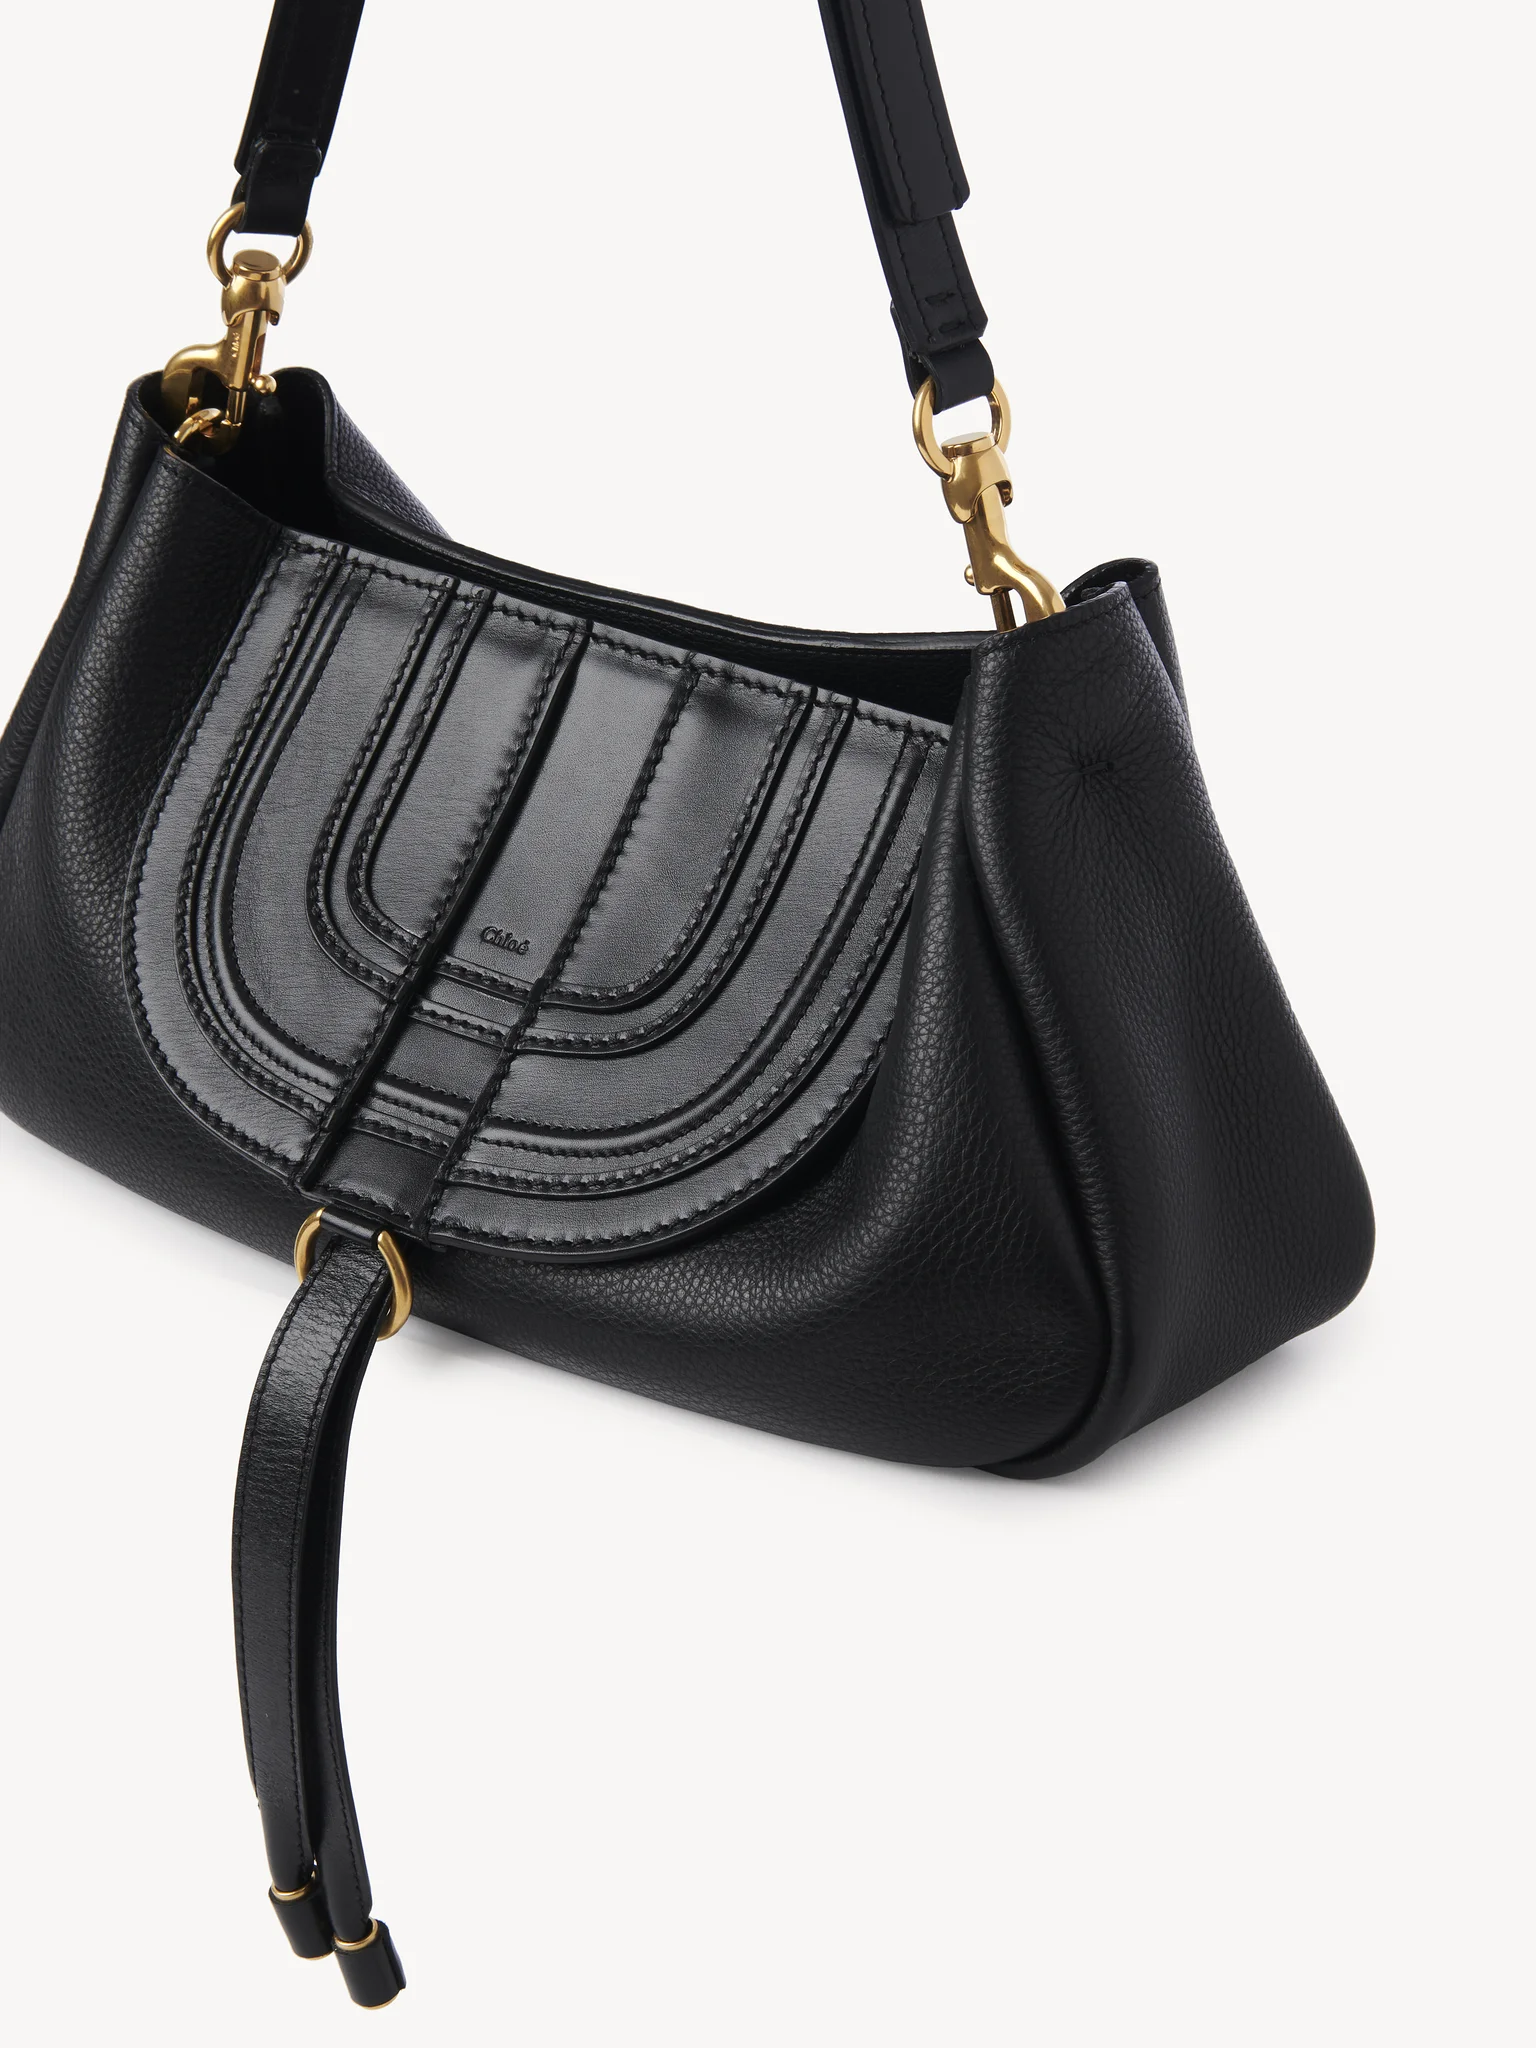 Chloe Marcie Shoulder Clutch Bag in Black available at TNT The New Trend Australia.